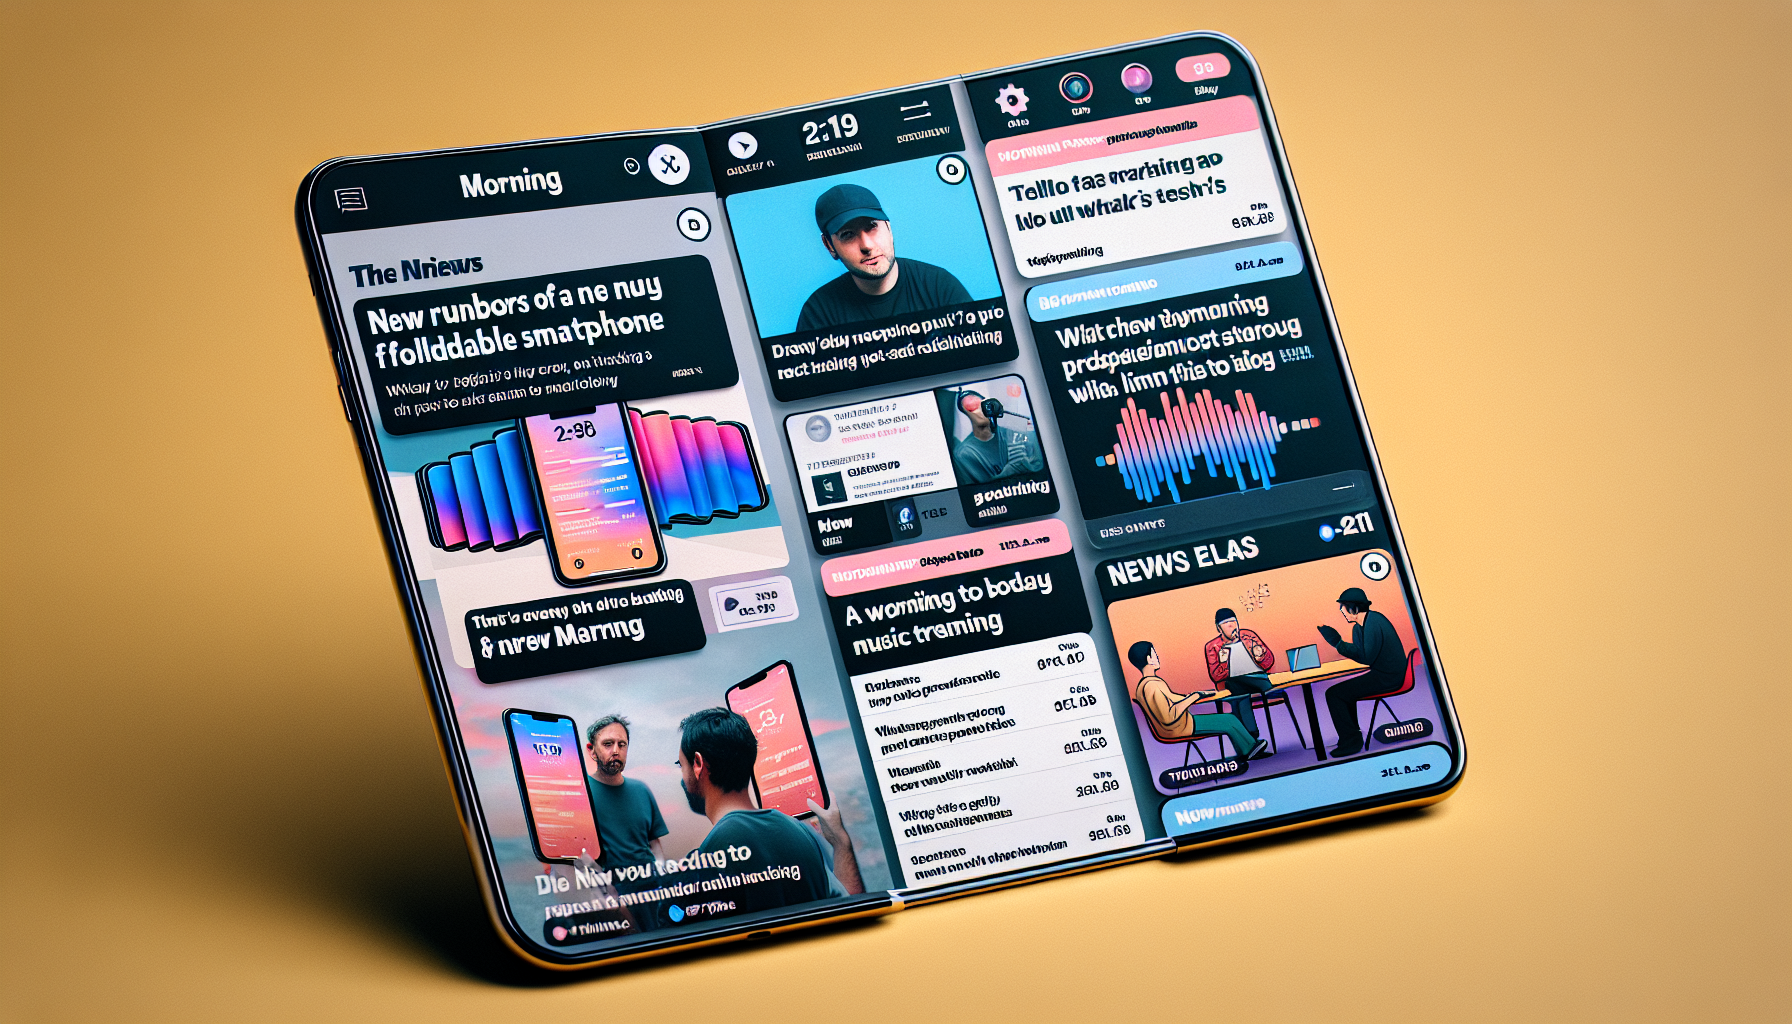 Gossips Regarding the Foldable iPhone, Rogan's Latest Agreement with Spotify, and More Morning Updates